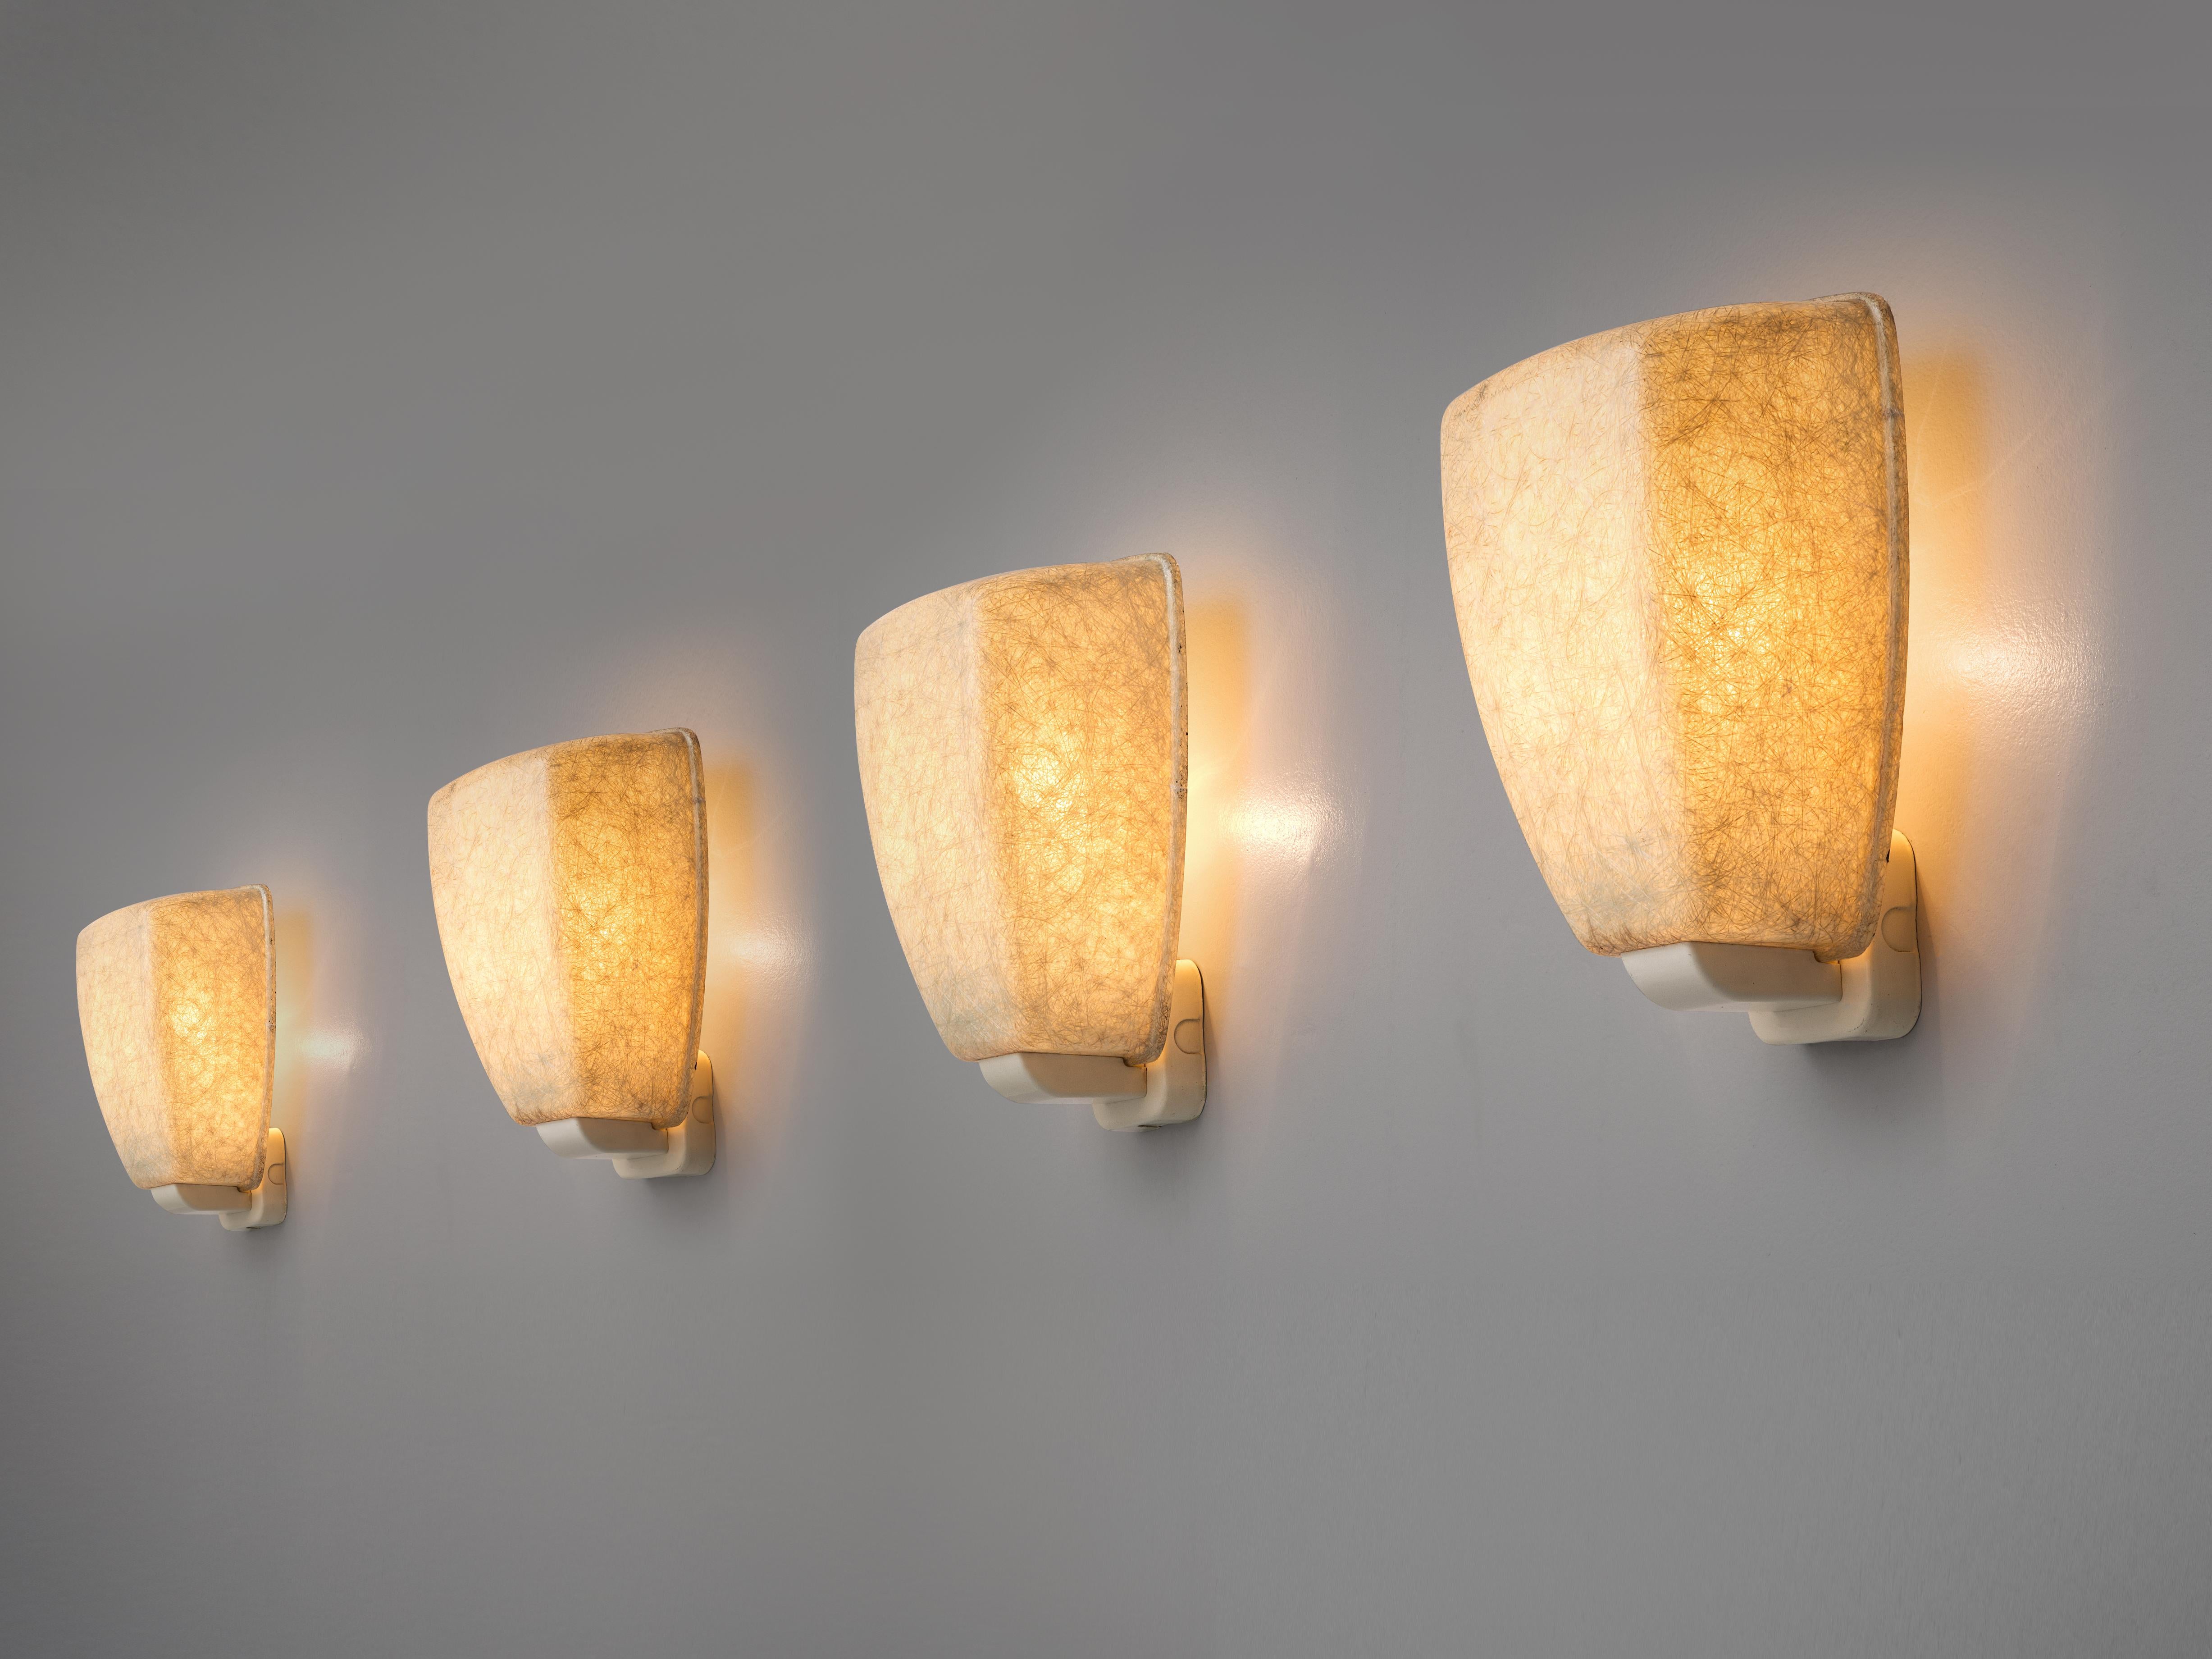 Wall lights, metal, fiberglass, Europe 1970s. 

Artistic wall lights of the seventies that embody a nice textured surface of intersecting lines. As a consequence, a transparent and atmospheric light is created. A simple design that bears visual